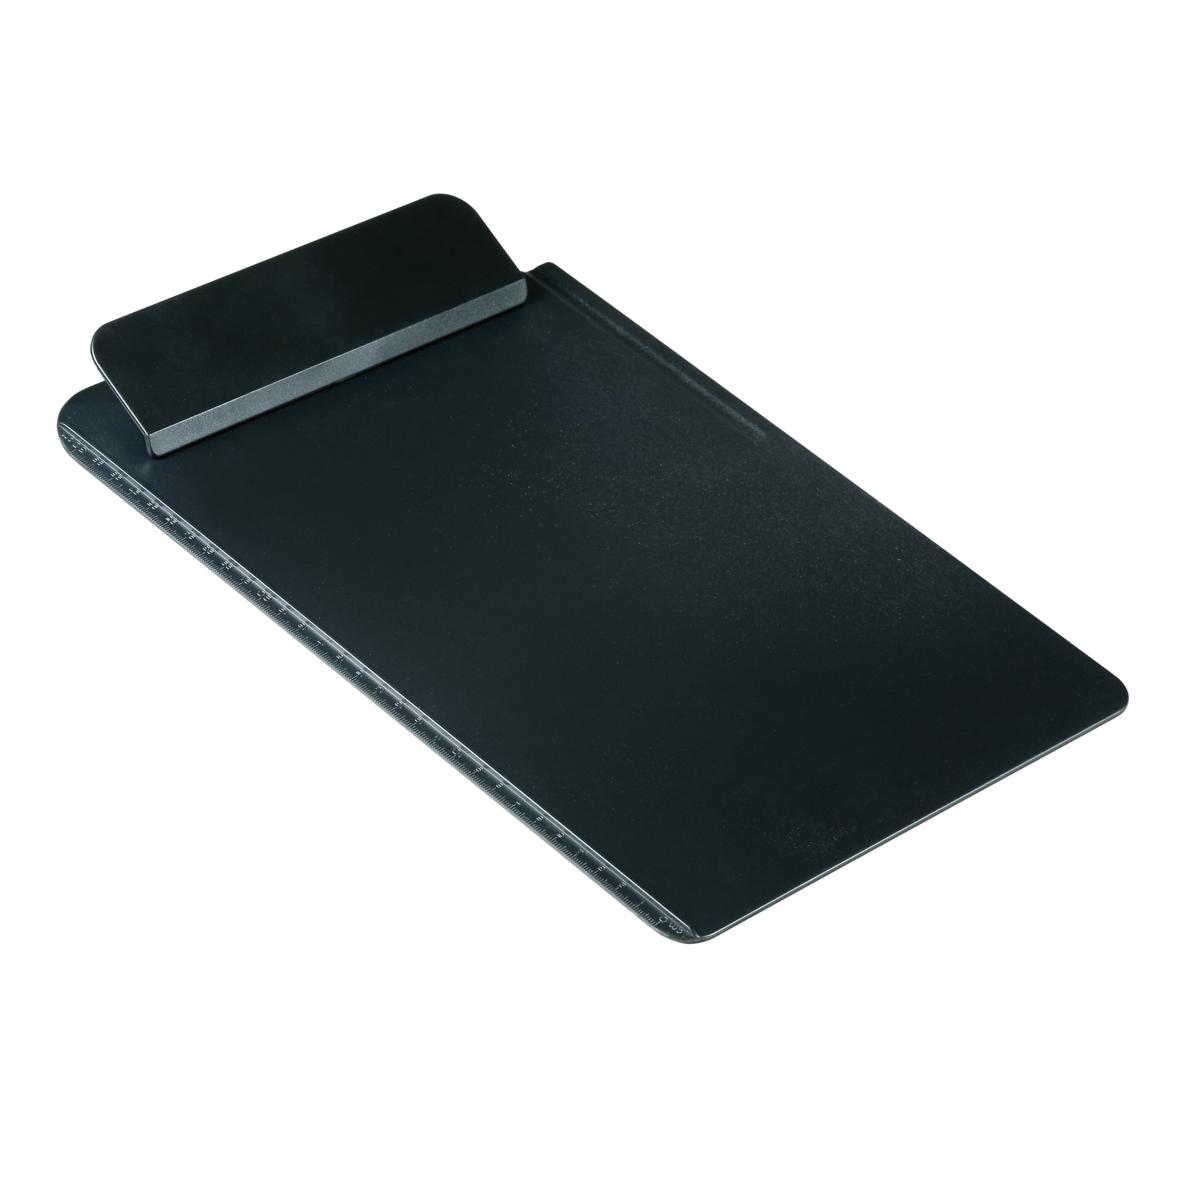 A4 Clipboard support made from recycled material - Benson - Abingdon